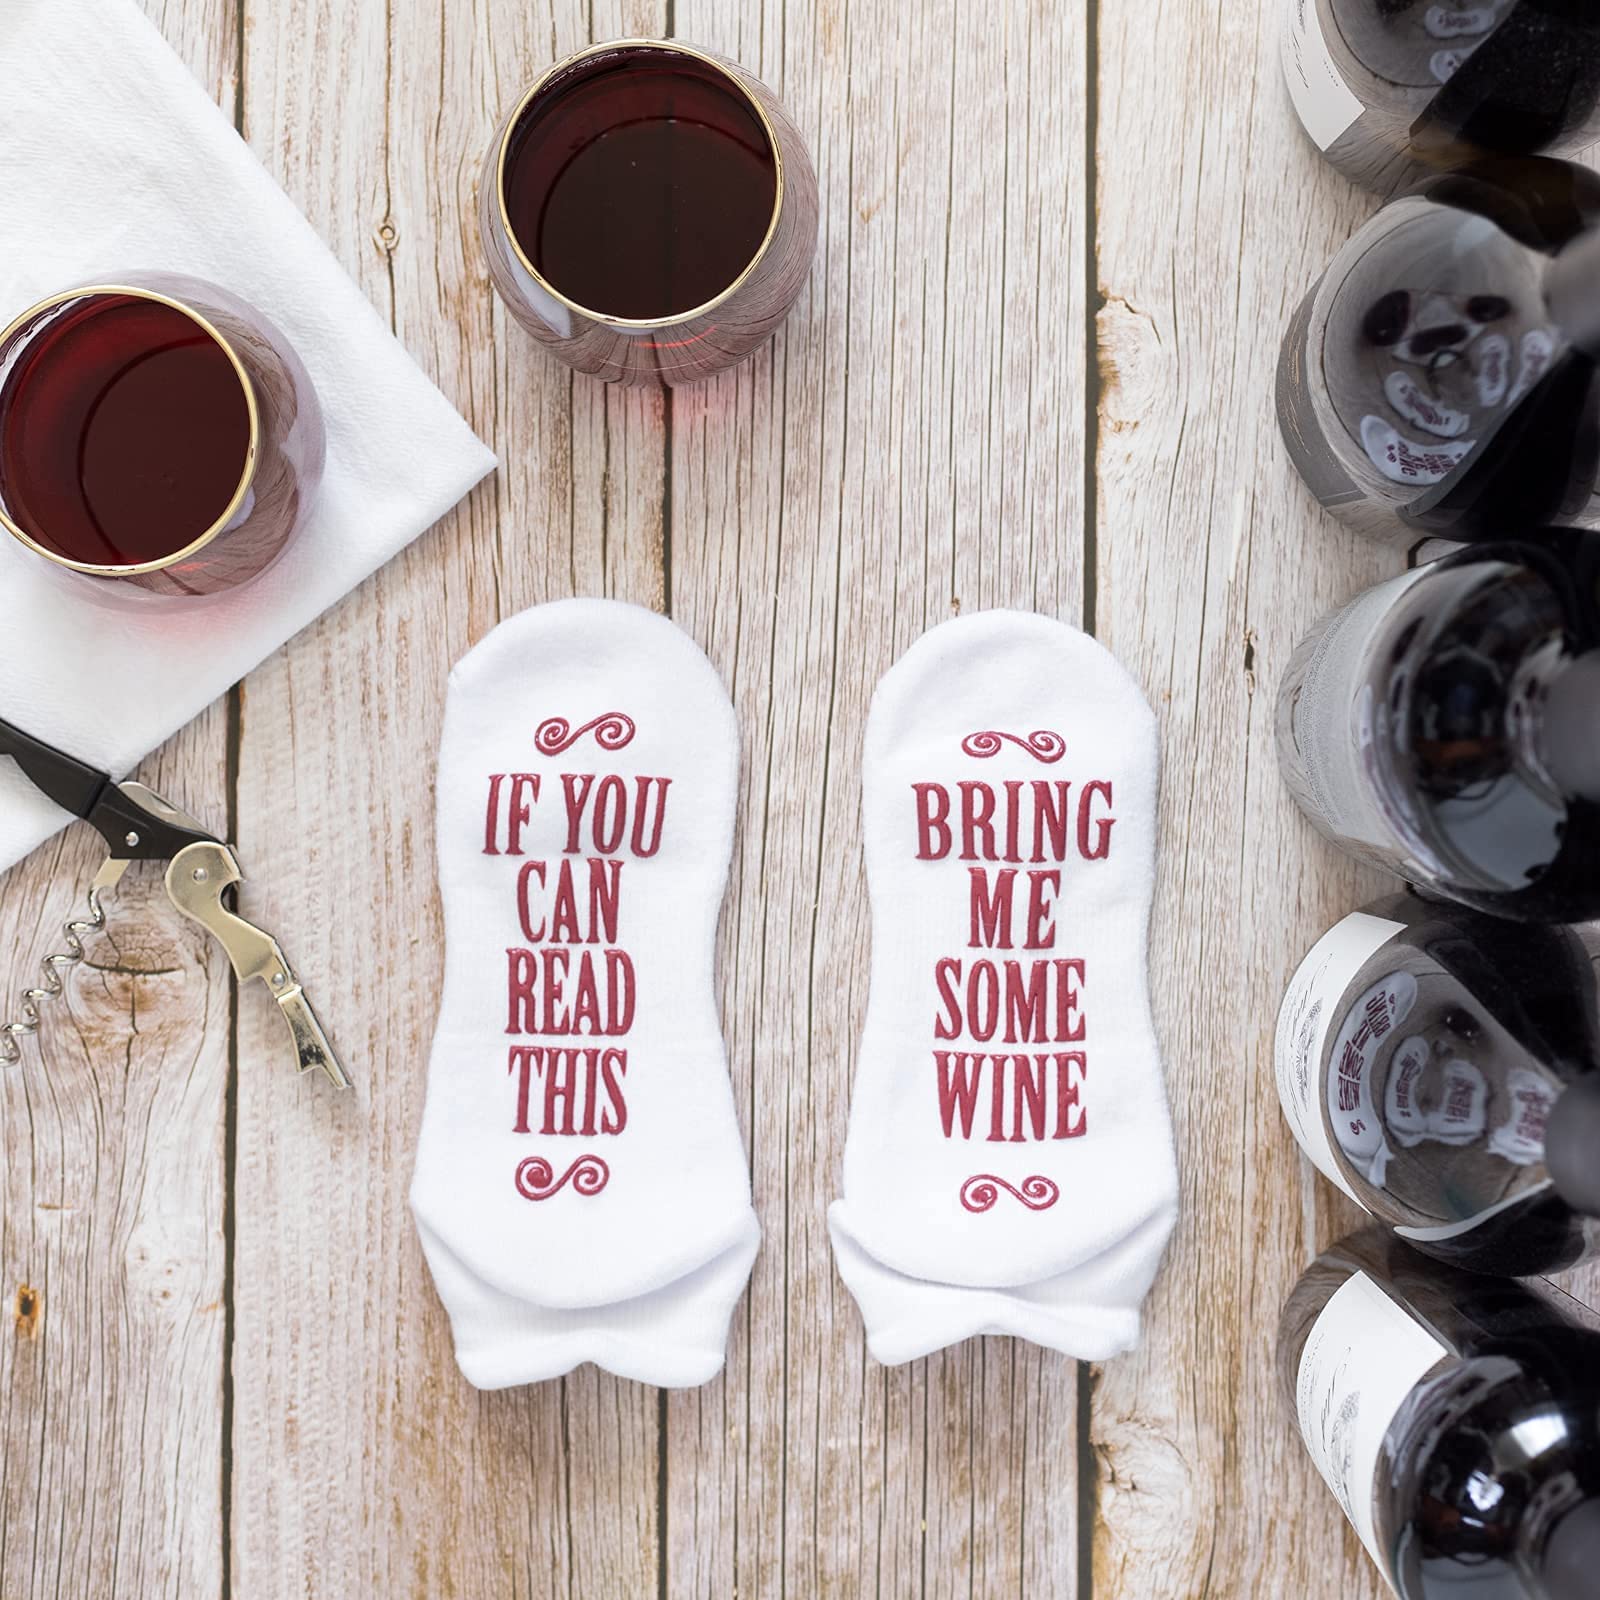 Haute Soiree Women's Novelty Socks - “If You Can Read This, Bring Me Some” - One Size Fits All